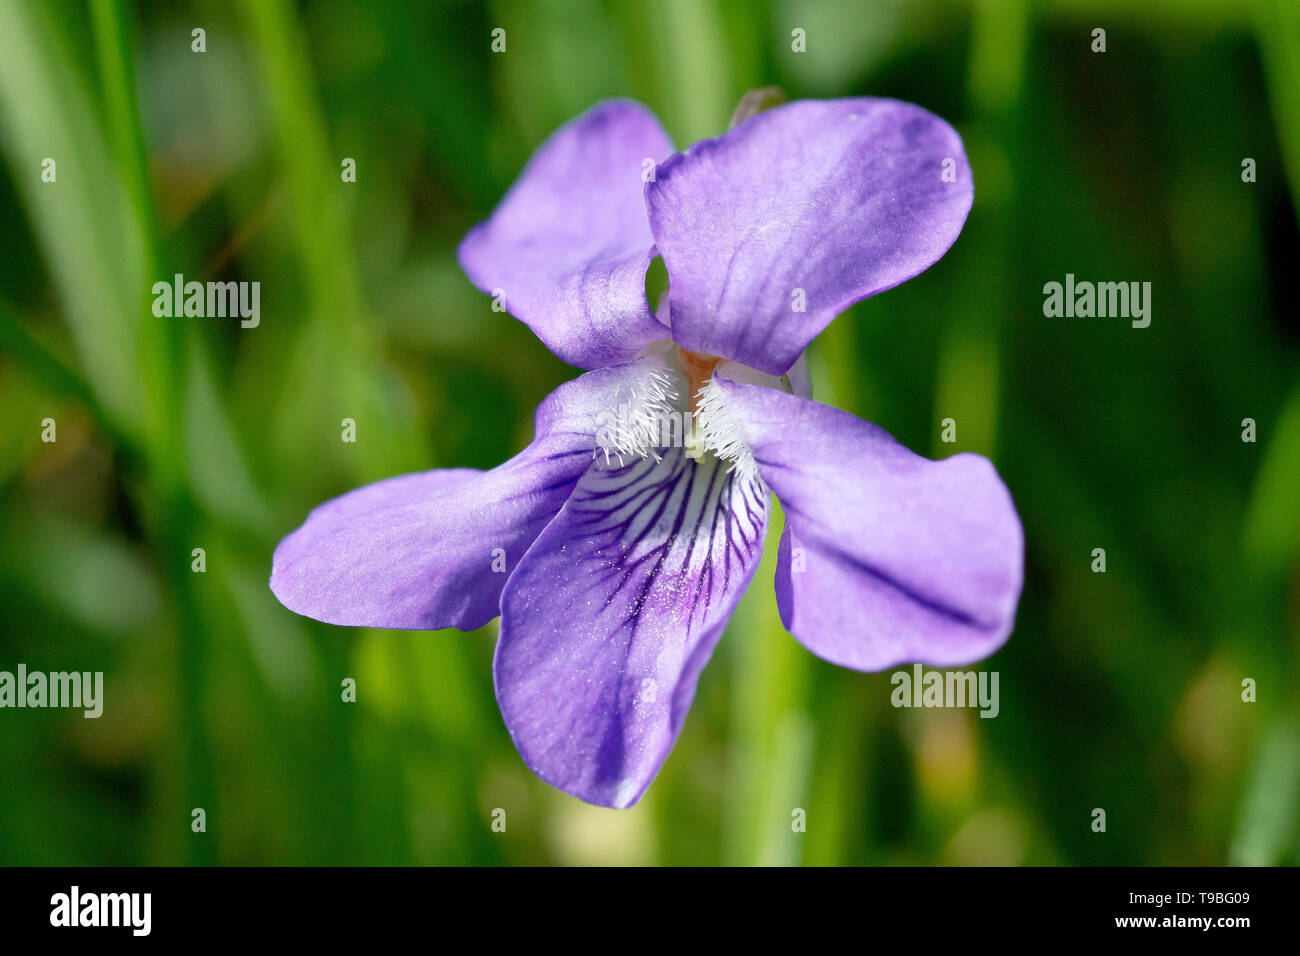 Common Dog-violet (viola riviniana), close up of a single flower with low depth of field. Stock Photo